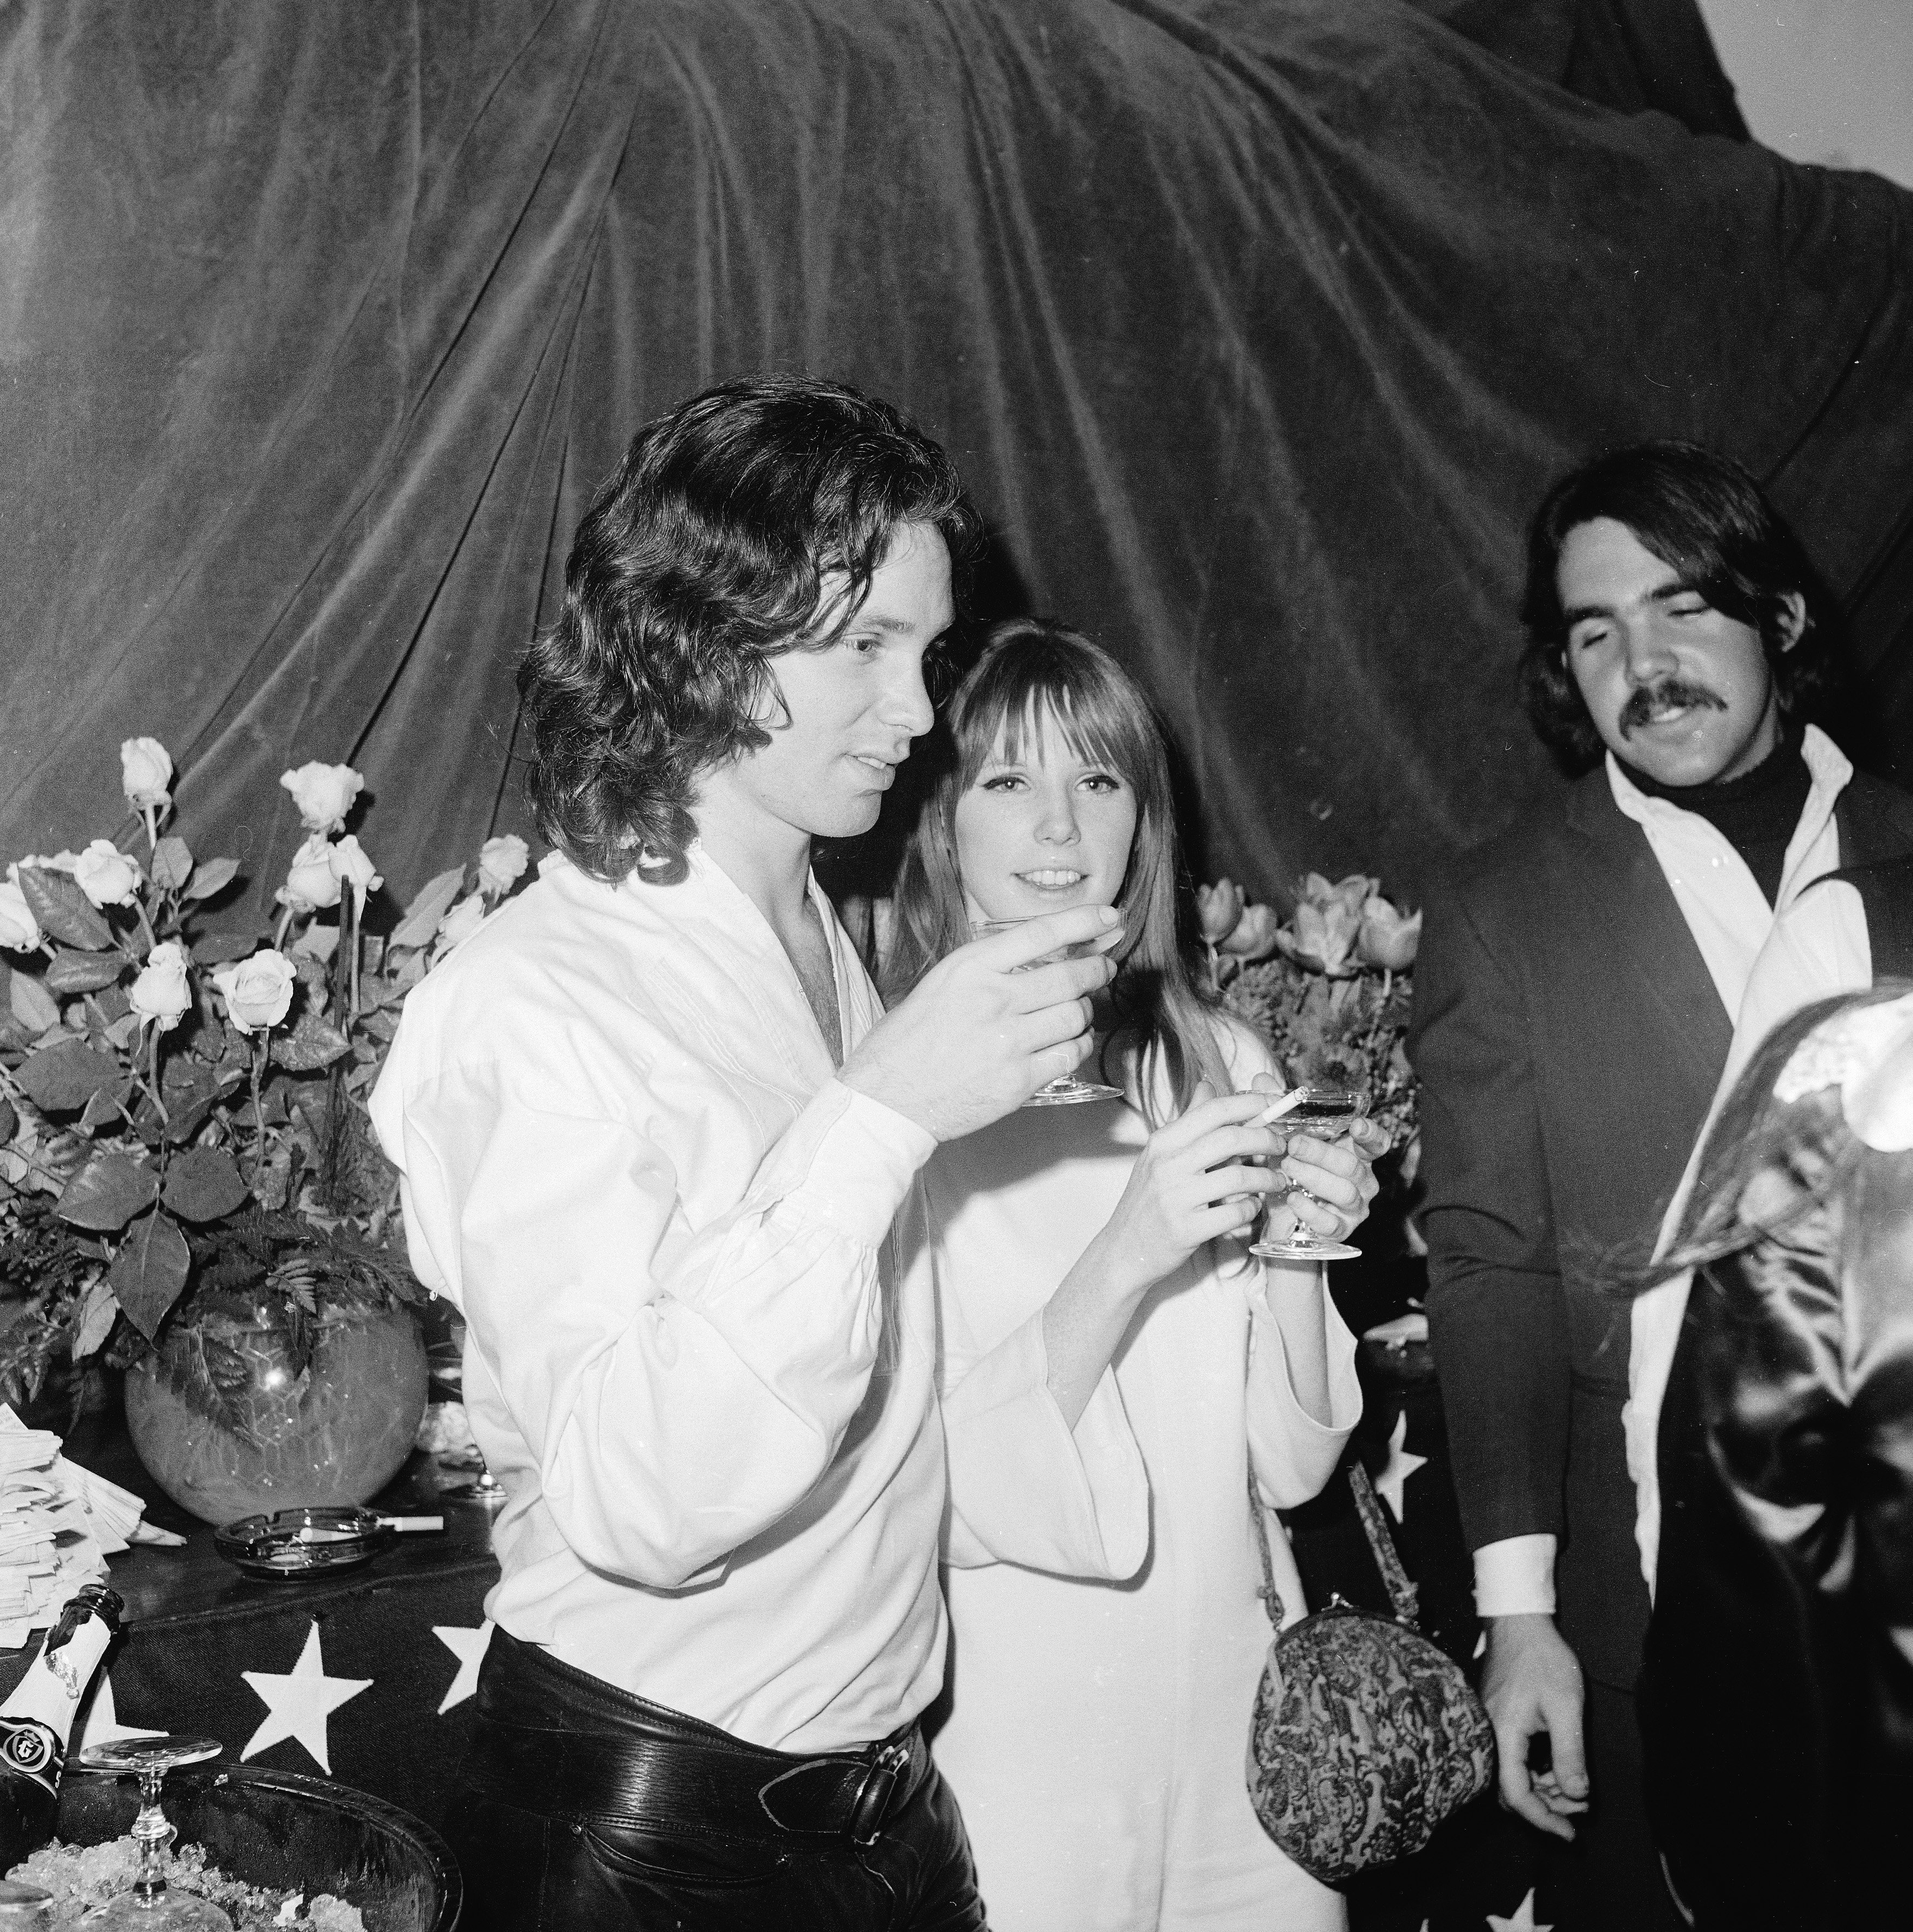 Jim Morrison  and Pamela Courson  have a drink at the opening of 'The Beard' at the Warner Playhouse, California, January 24, 1968.  Source: Getty Images